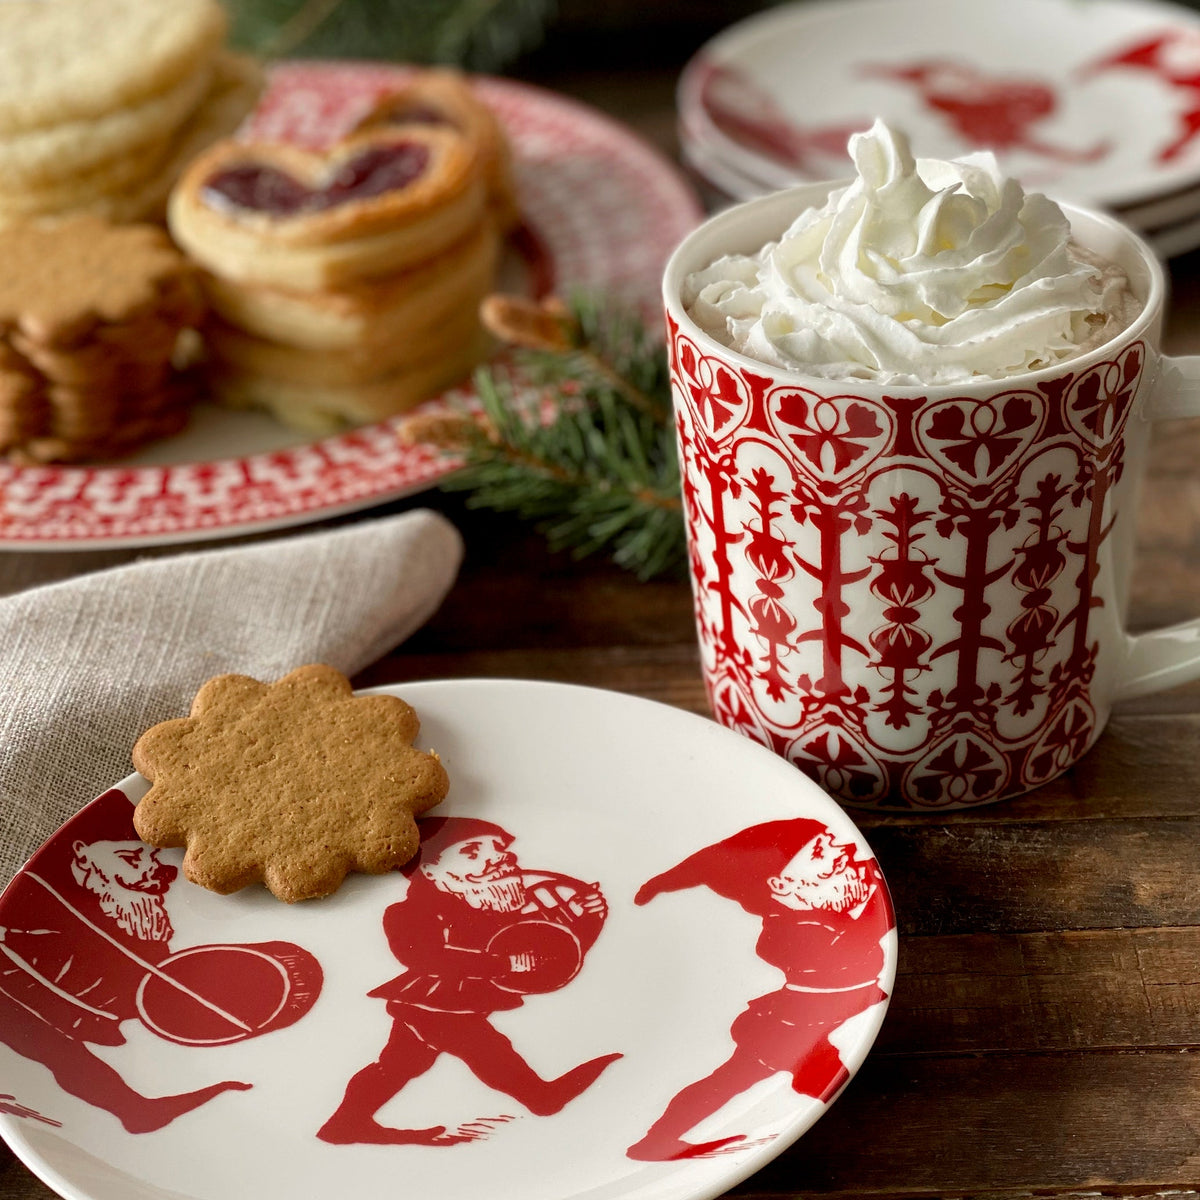 A cup of warm coffee and sweet treats - cookies, freshly baked from the Caskata brand&#39;s Holiday Party V.2 Mixed Set of 12 - are delicately arranged on a table.